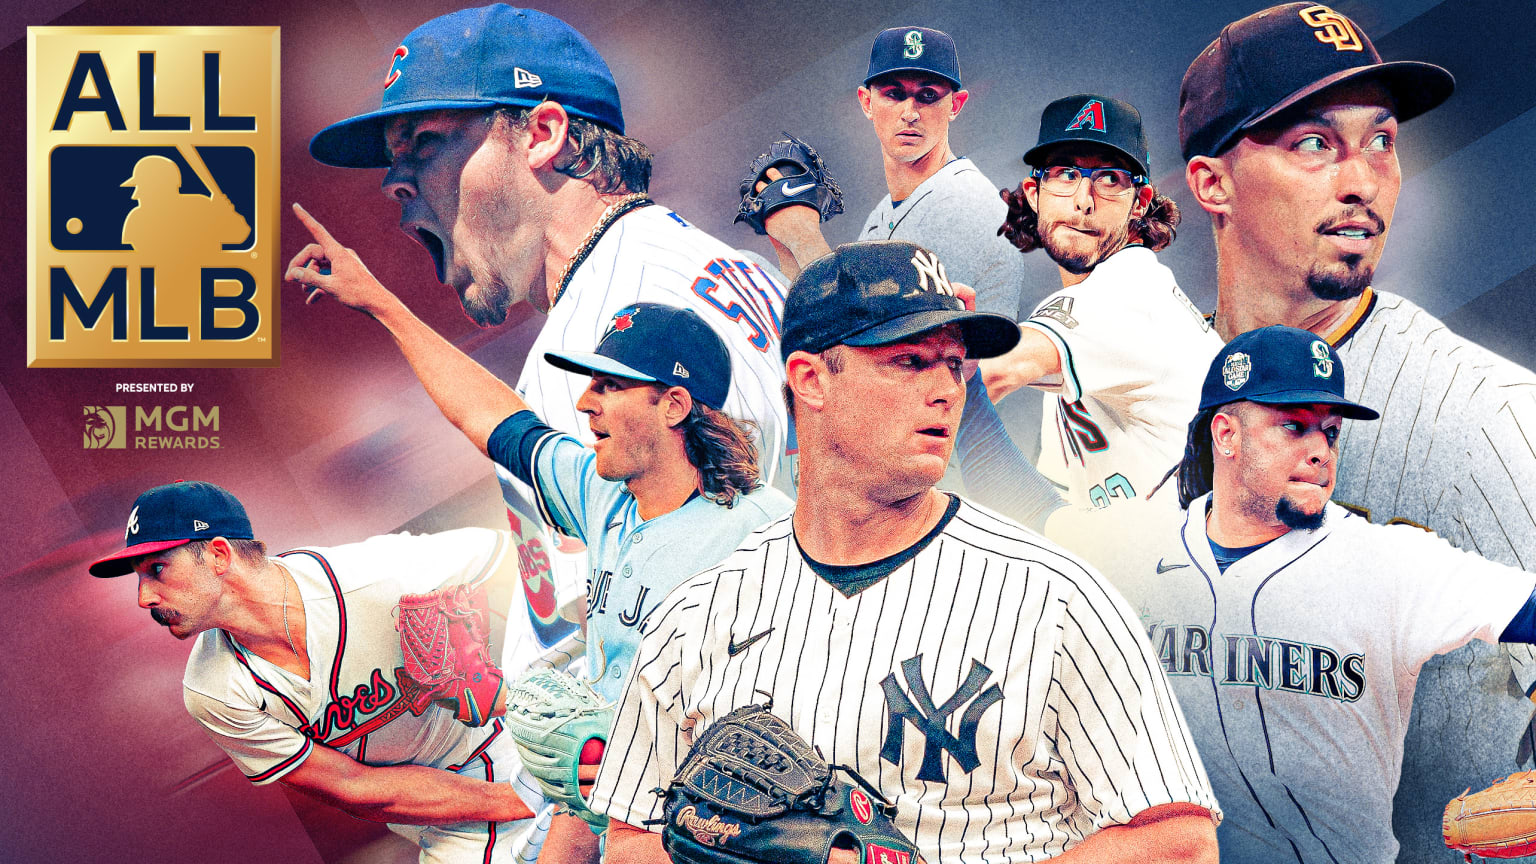 A photo illustration with 8 starting pitchers